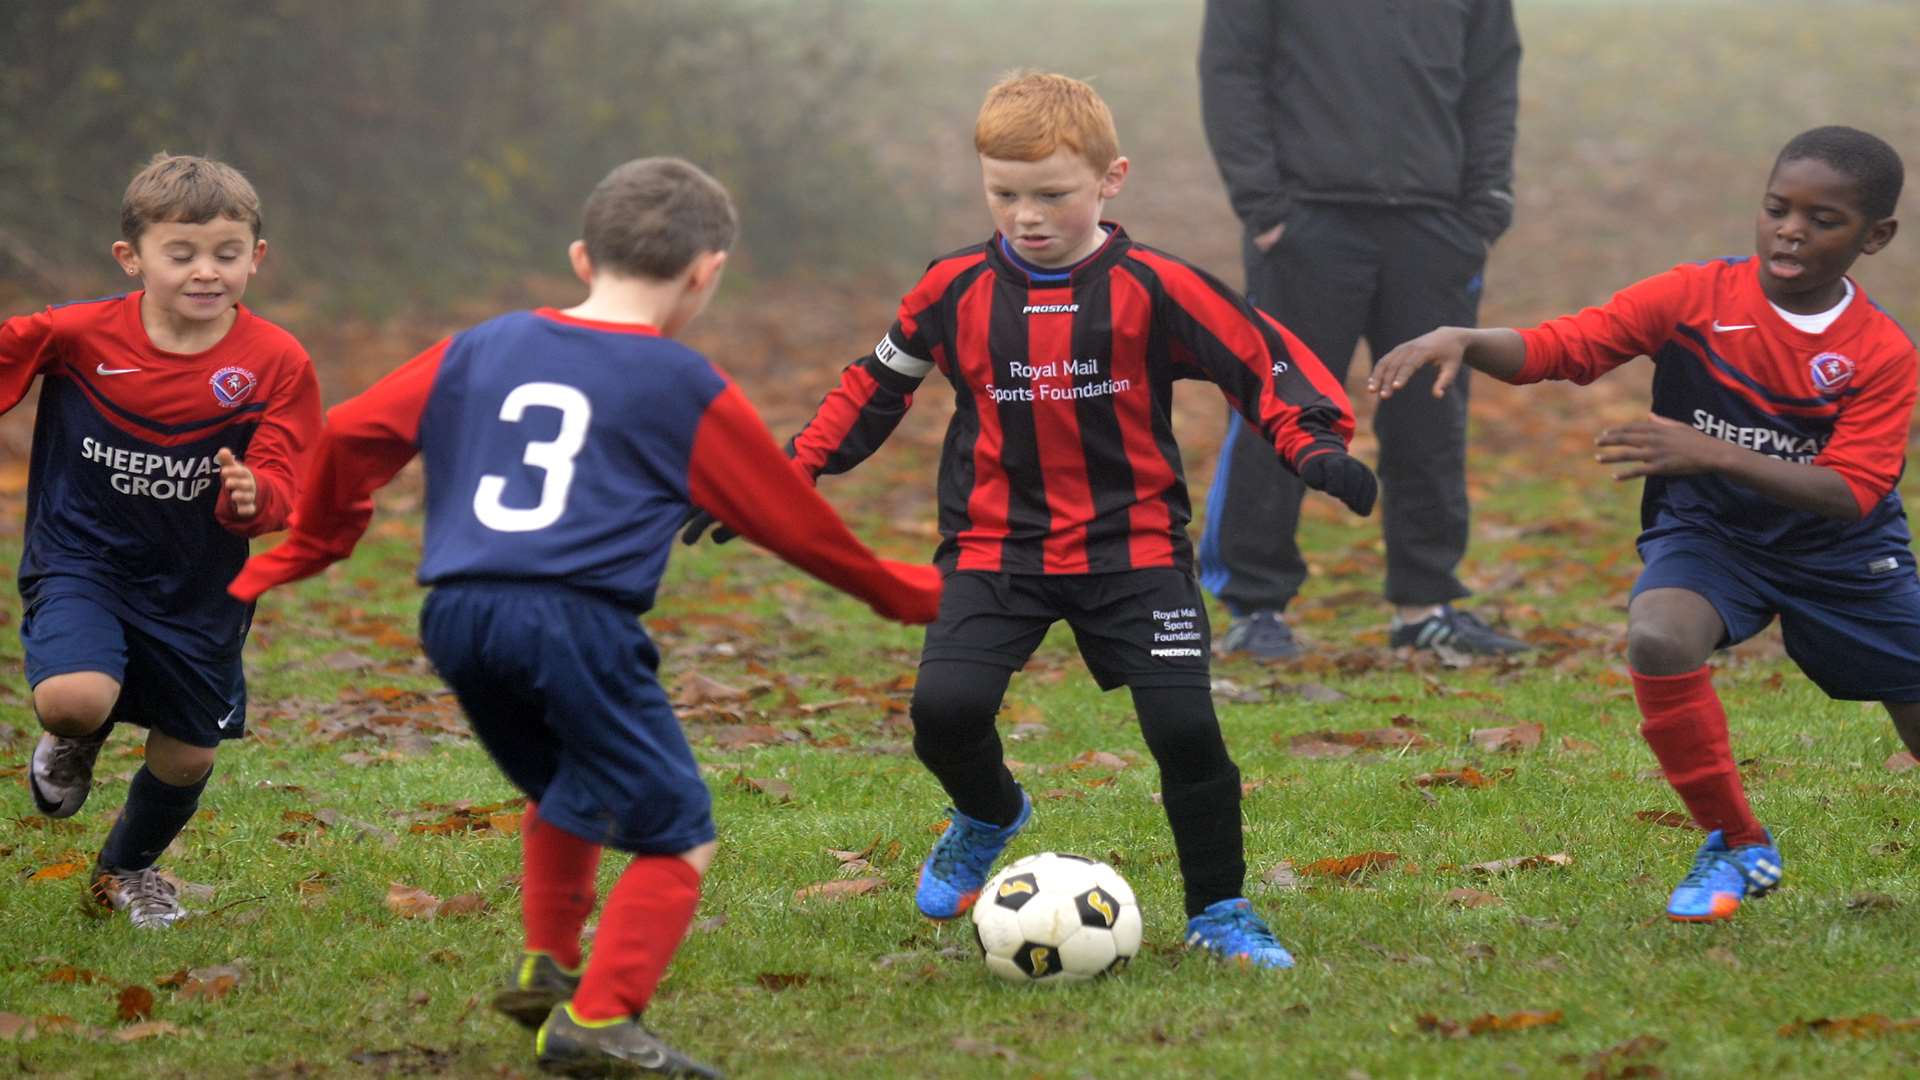 The under-8s of Hempstead Valley Colts and Rainham 84 do battle Picture: Chris Davey